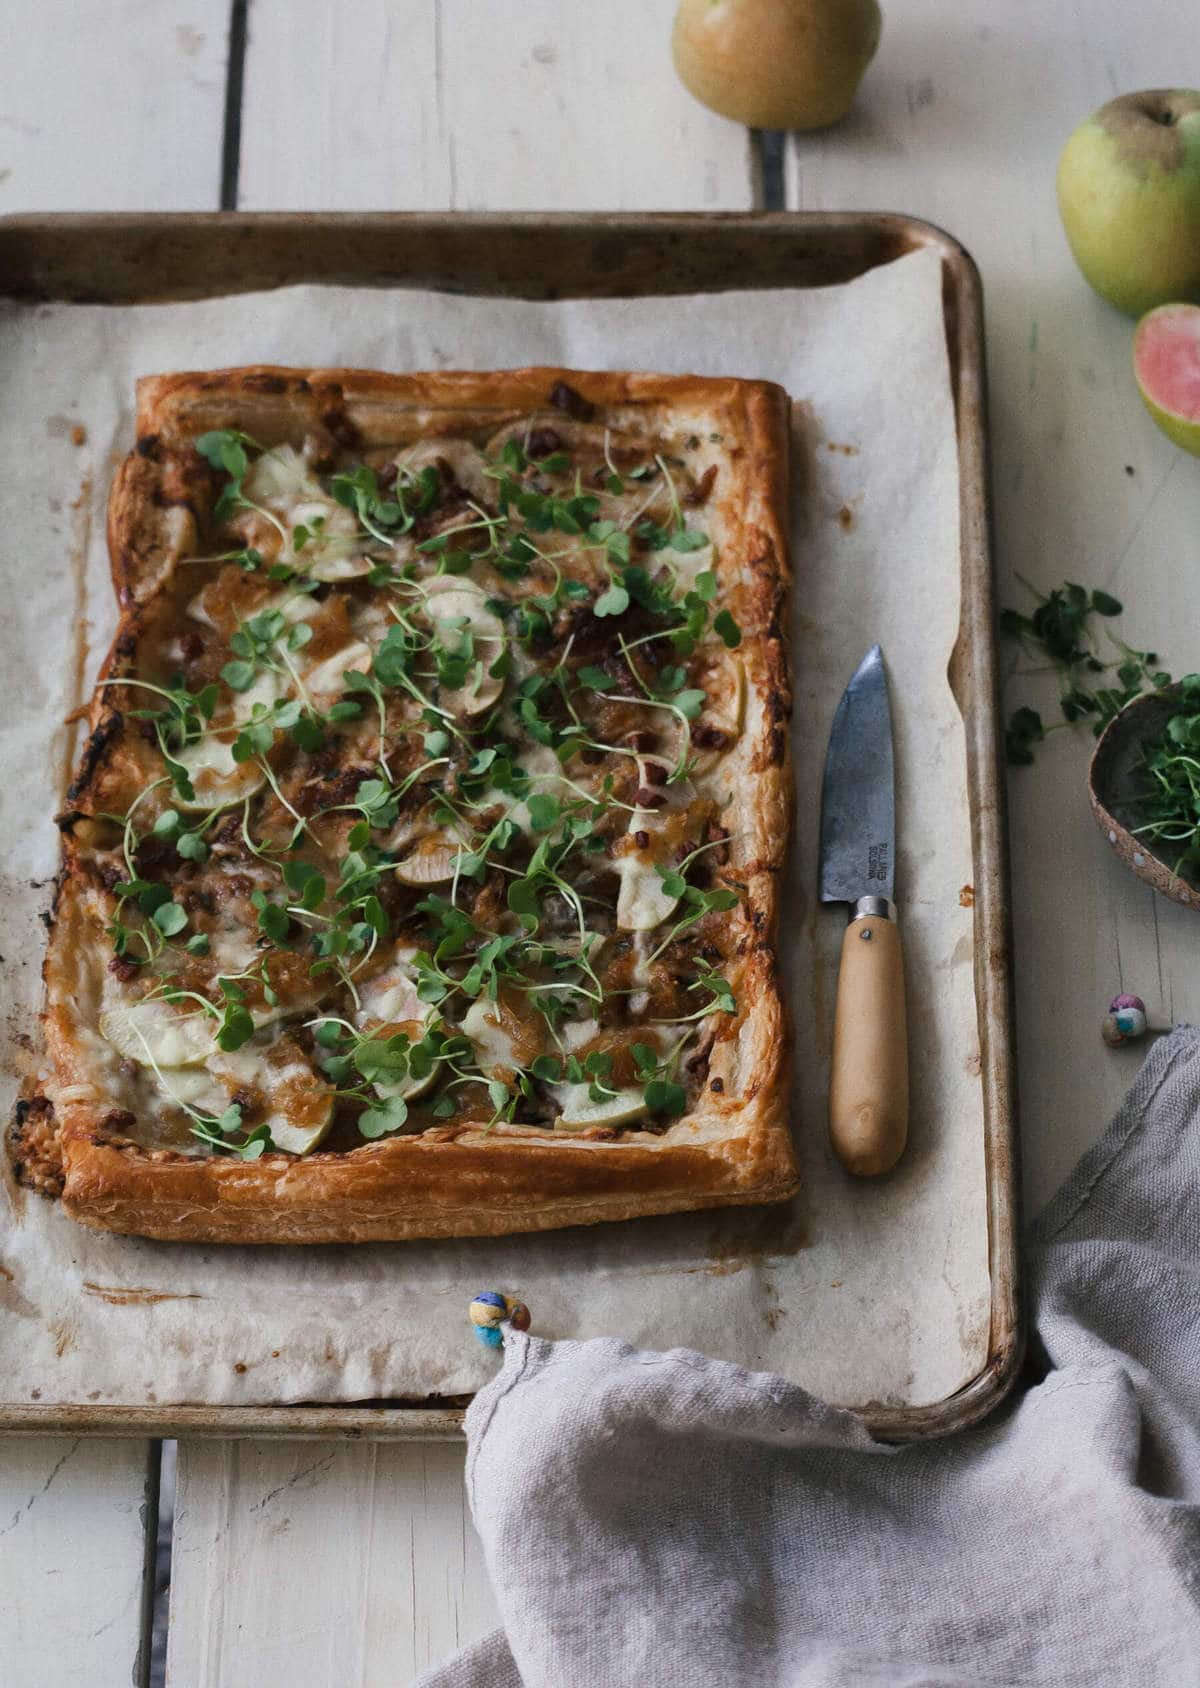 Fancy Apple Gruyere Tart with Caramelized Onions and Pancetta